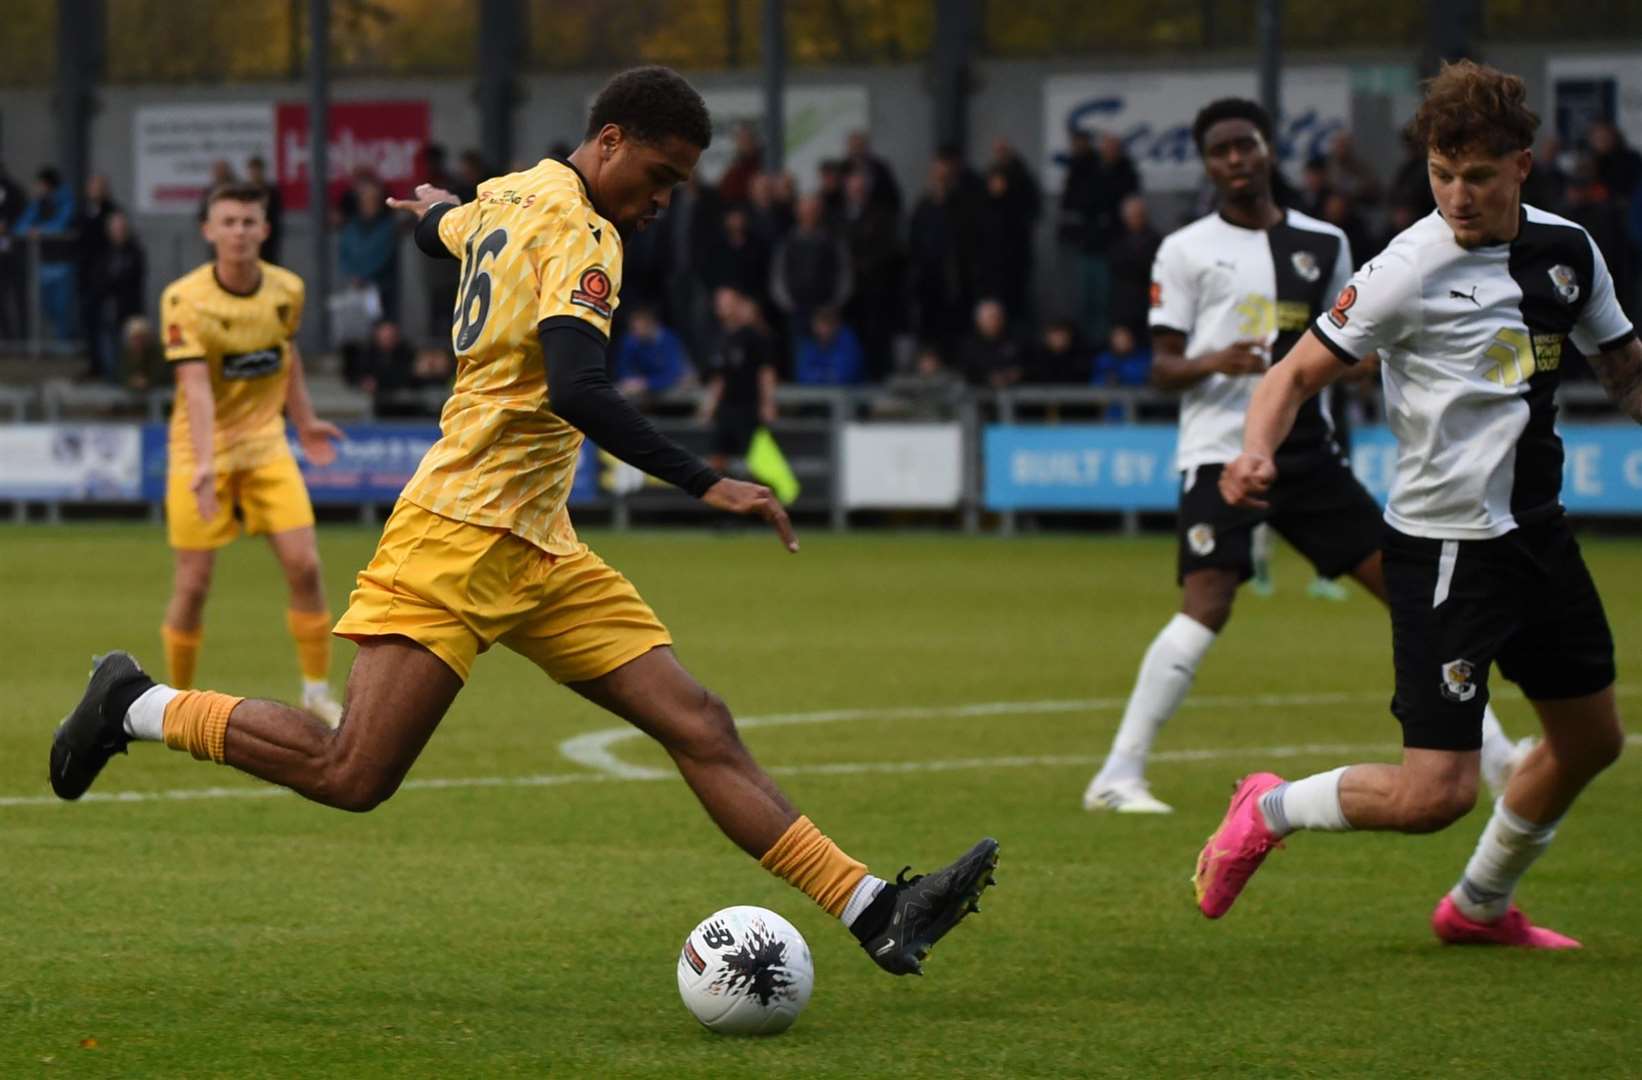 Maidstone’s Liam Sole in action during their FA Trophy win at Dartford on Saturday. Picture: Steve Terrell